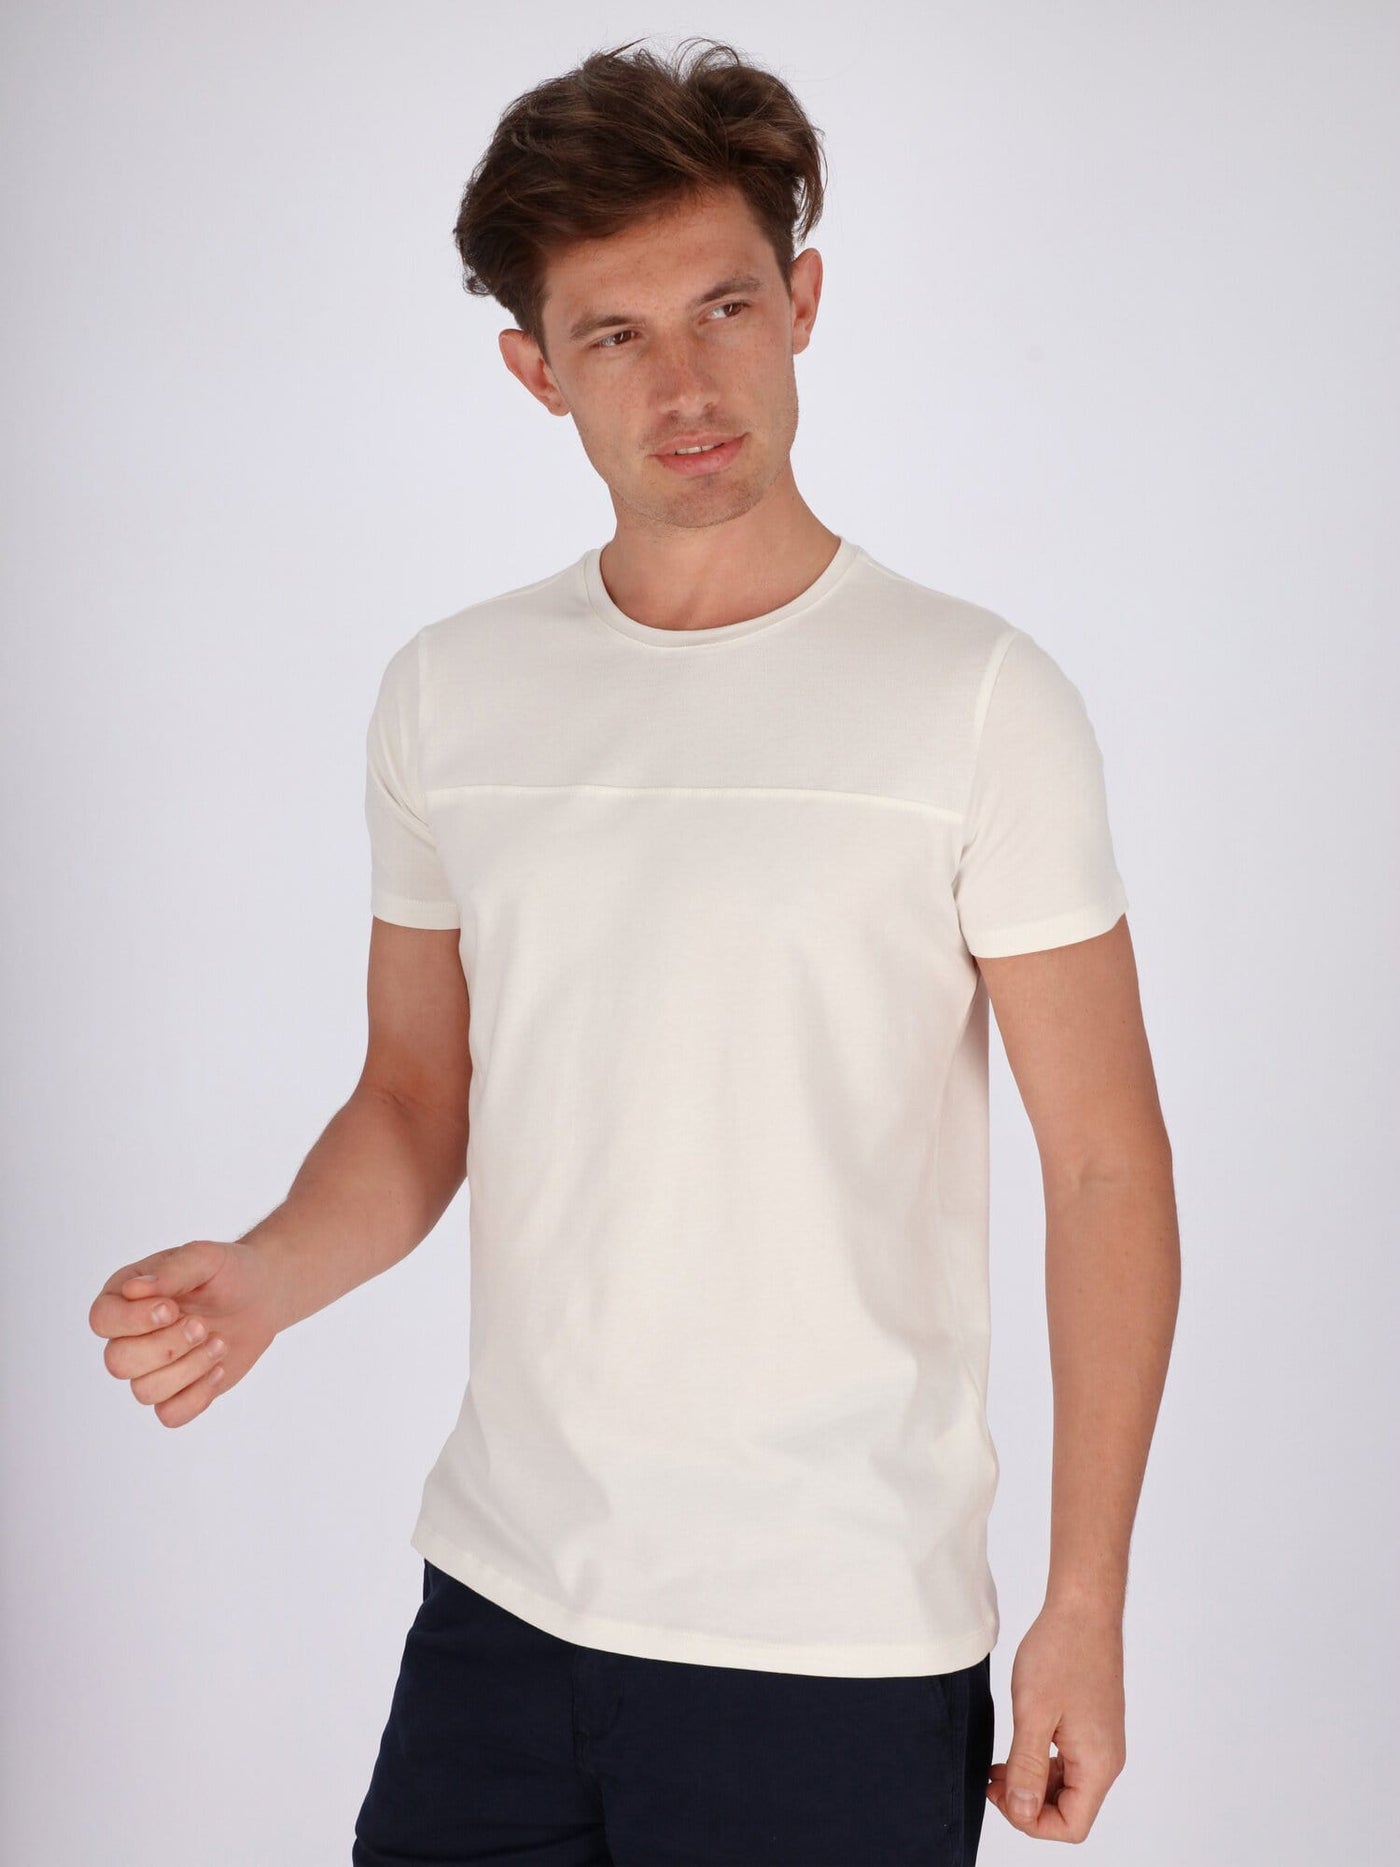 OR T-Shirts Off White / S Basic T-shirt with Front-line Crosswise